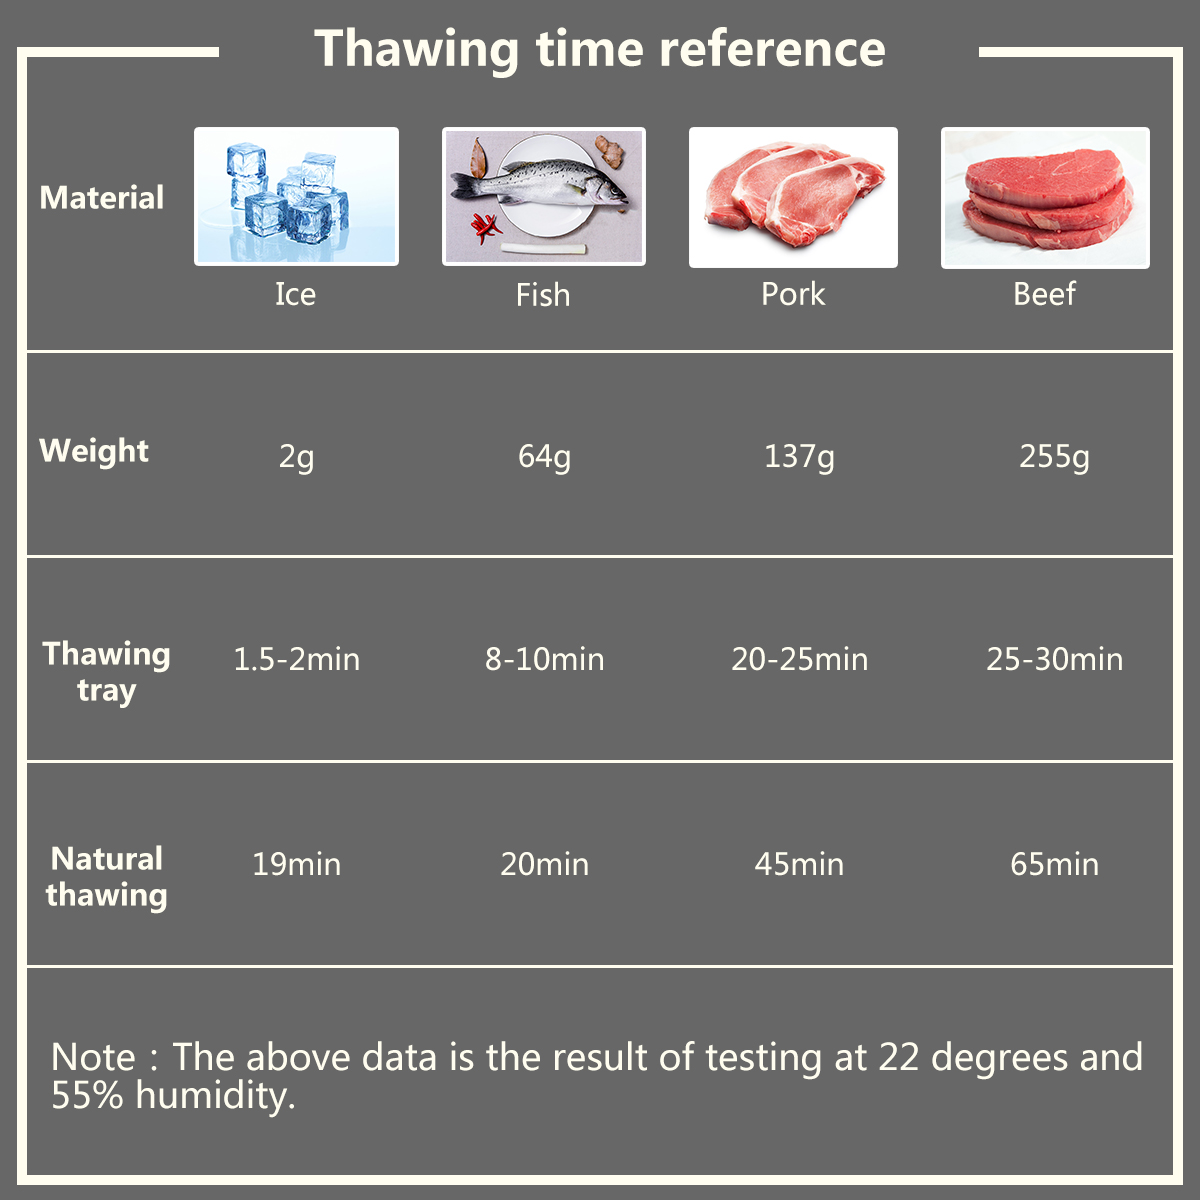 Defrosting-Tray-Thawing-Plate-Frozen-Food-Faster-and-Safer-Way-to-Defrost-Meat-or-Frozen-Food-Plate-1344447-5